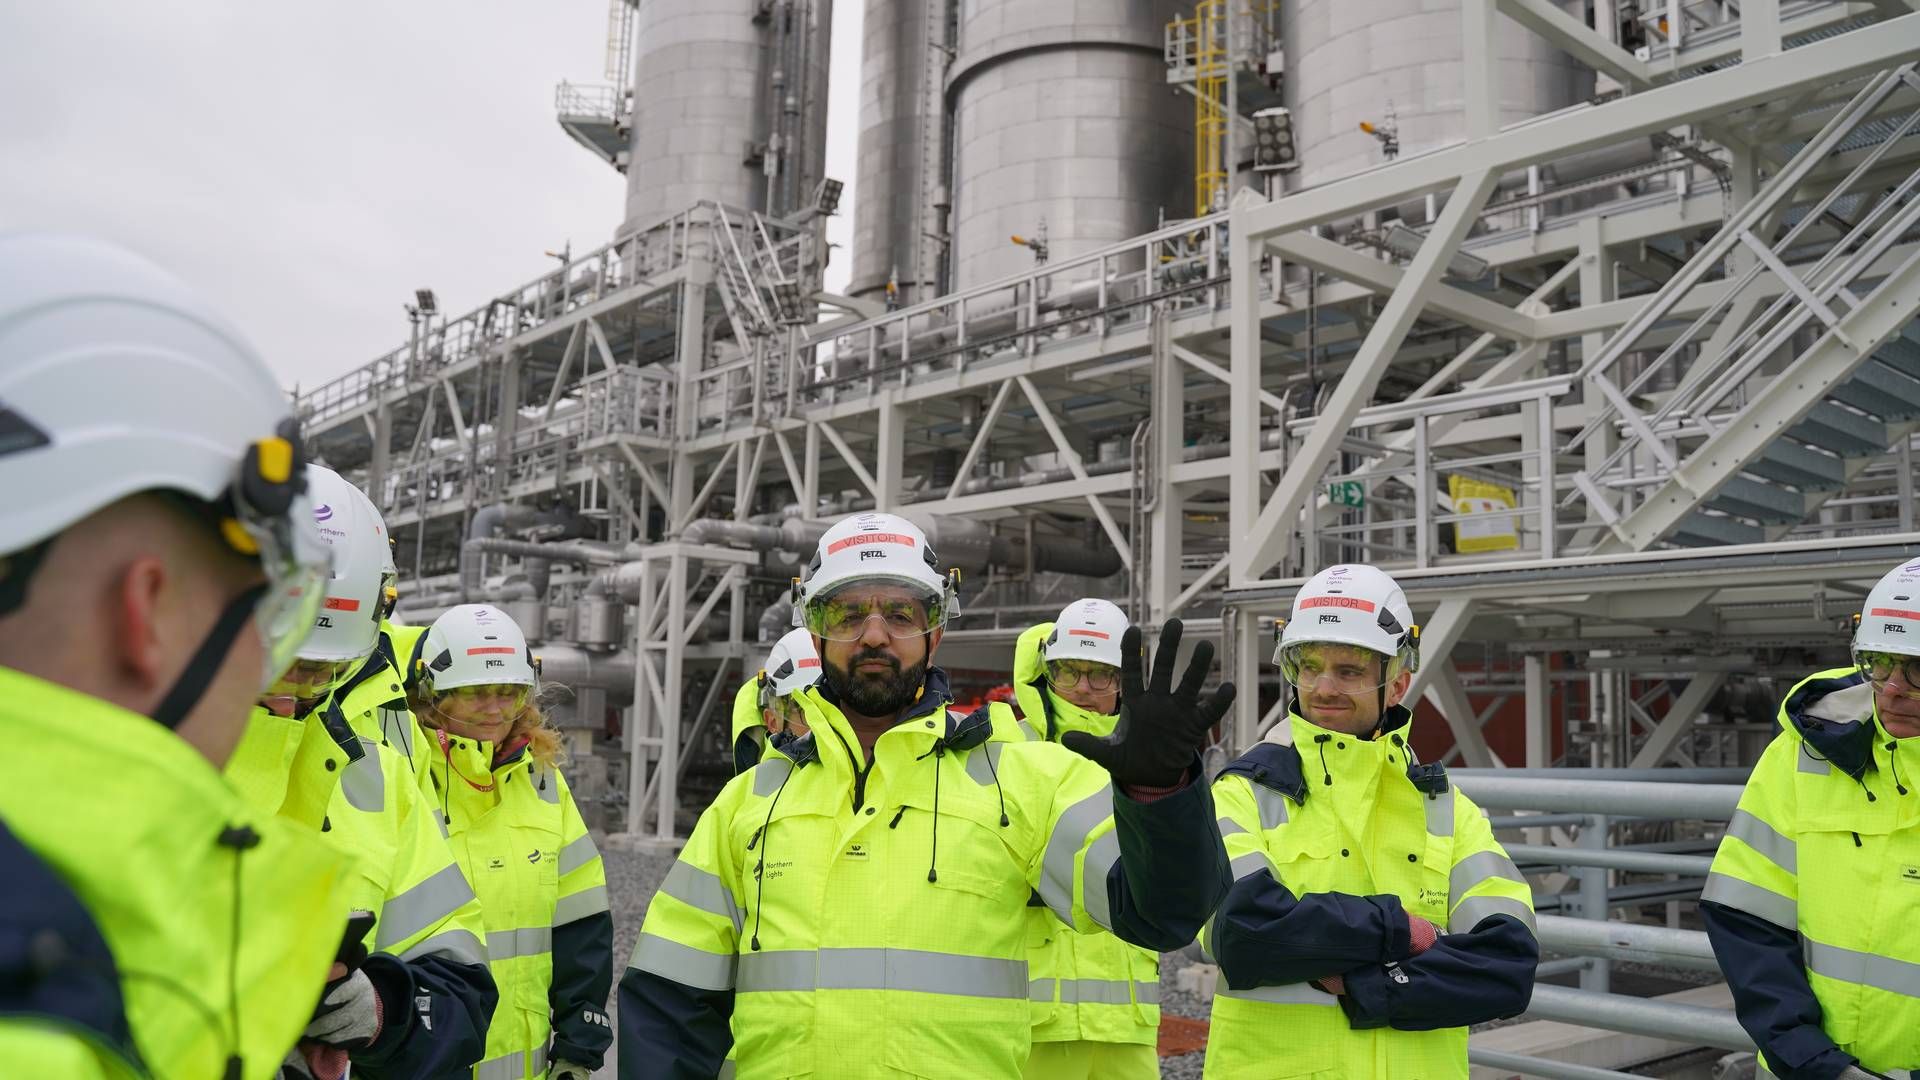 Imran Abdul-Majid is the technical manager of the Northern Lights project, built just outside Bergen, Norway. He showed EnergyWatch around the site, which will store up to five million tons of CO2 per year in the future. | Photo: Laura Kold